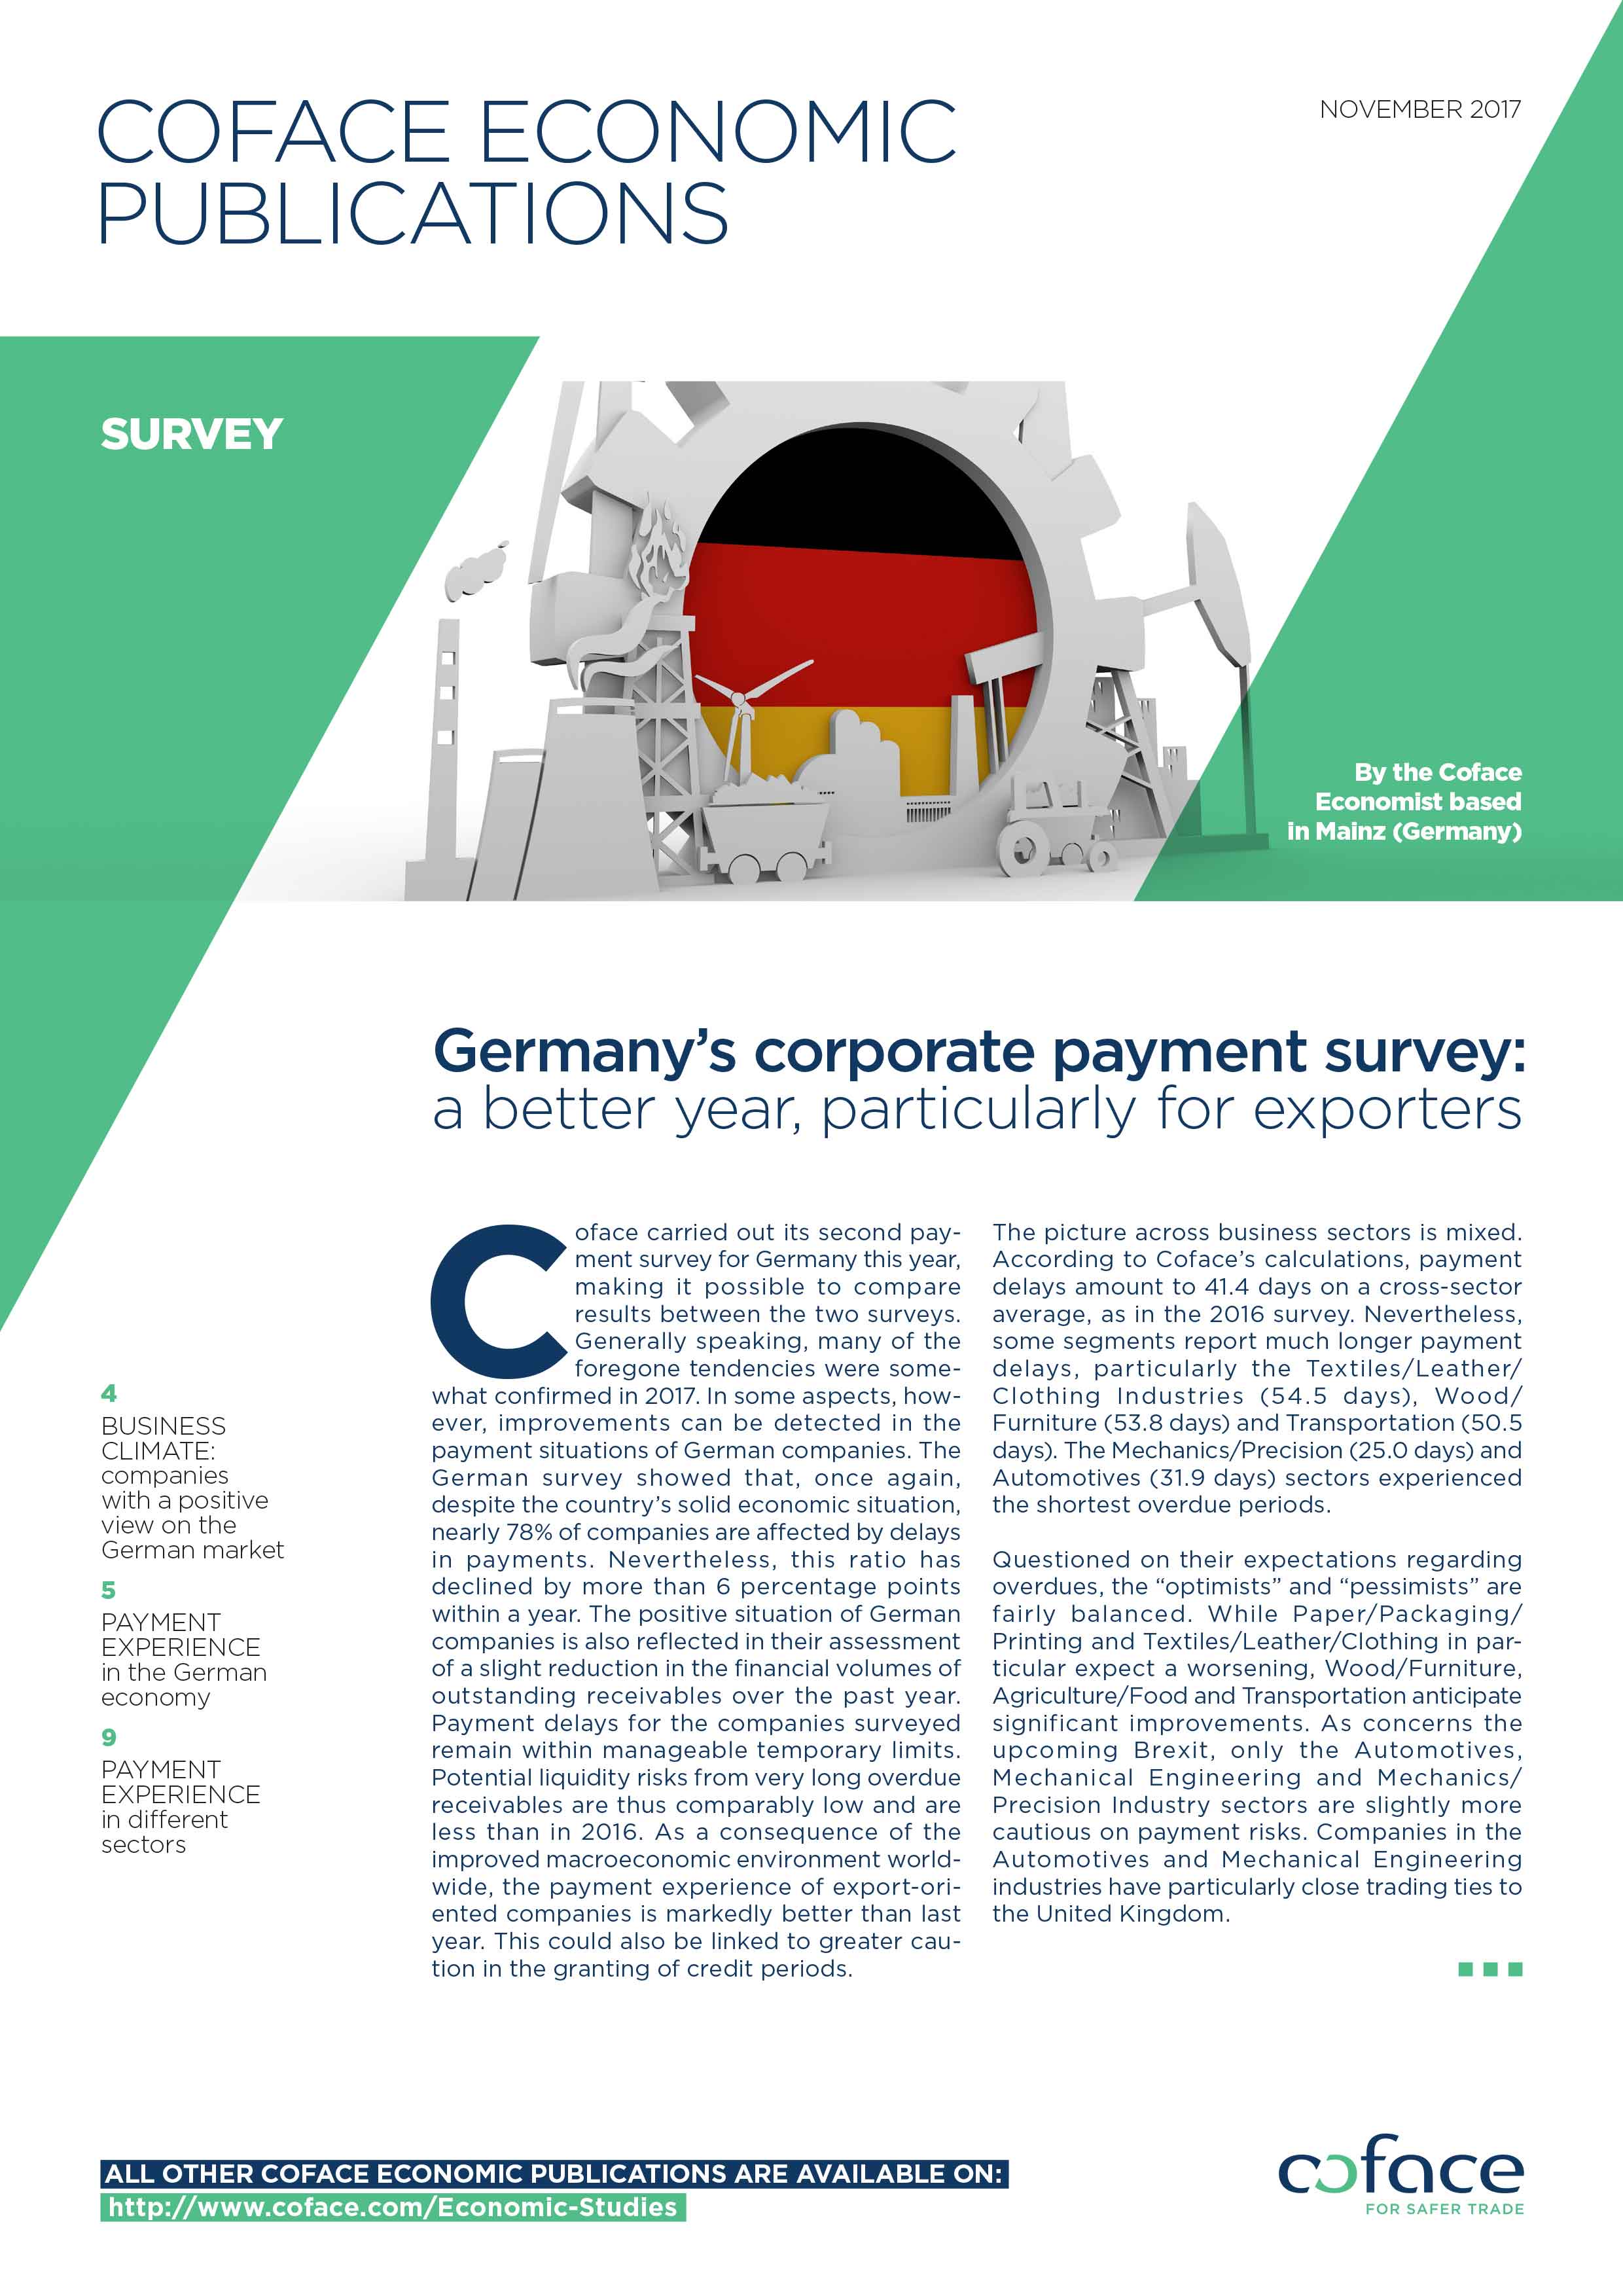 Germany's corporate payment survey: a better year, particularly for exporters